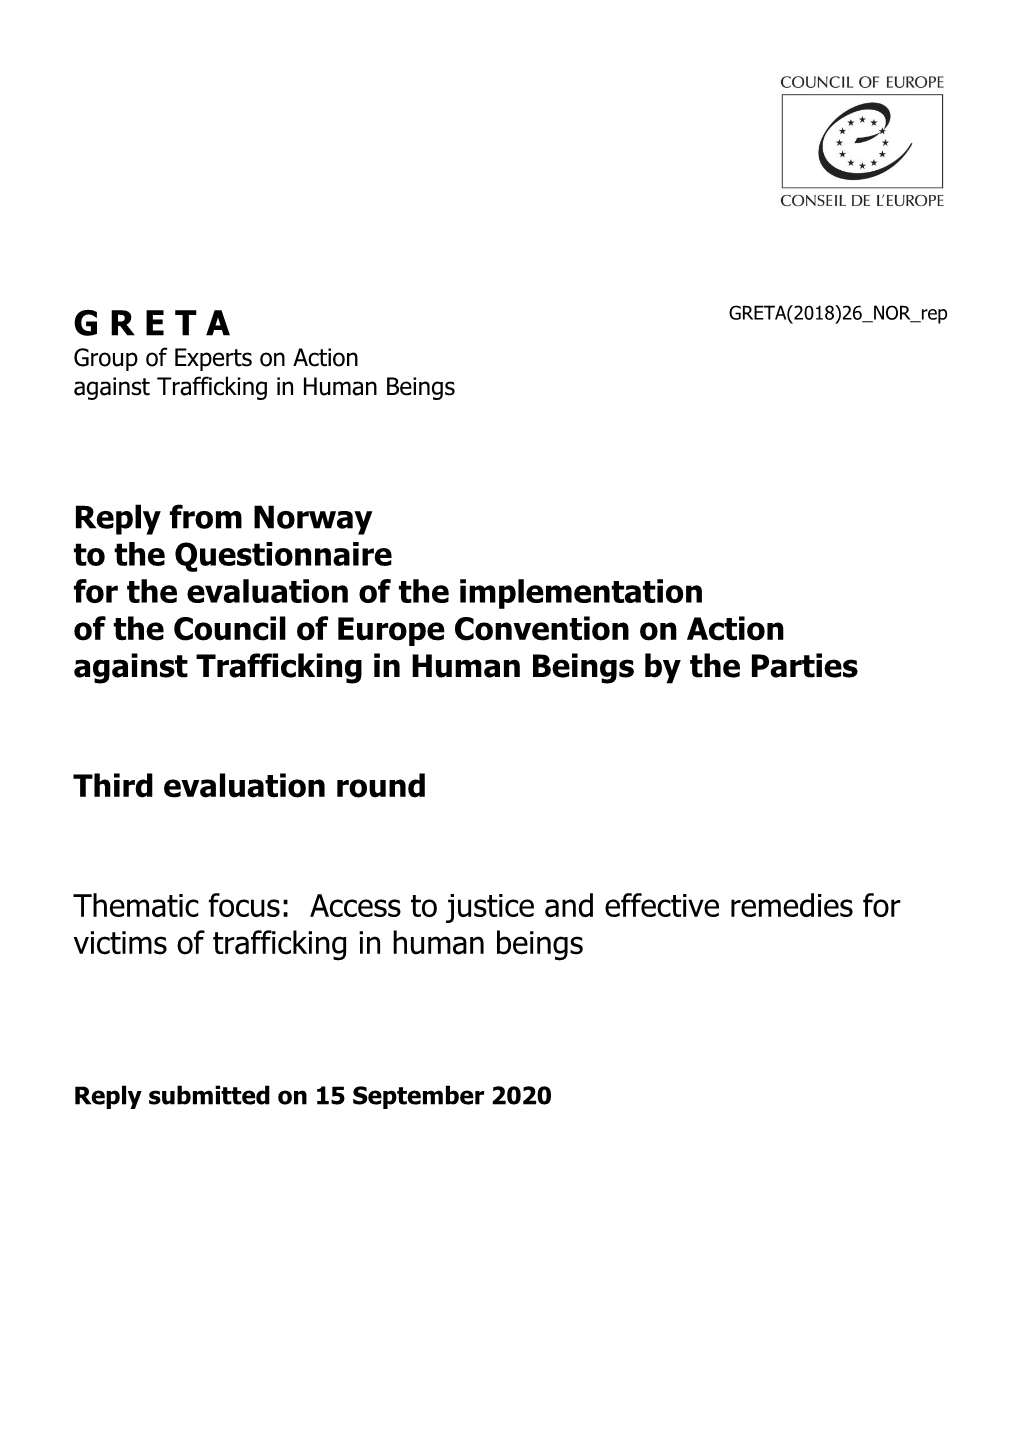 G R E T a GRETA(2018)26 NOR Rep Group of Experts on Action Against Trafficking in Human Beings